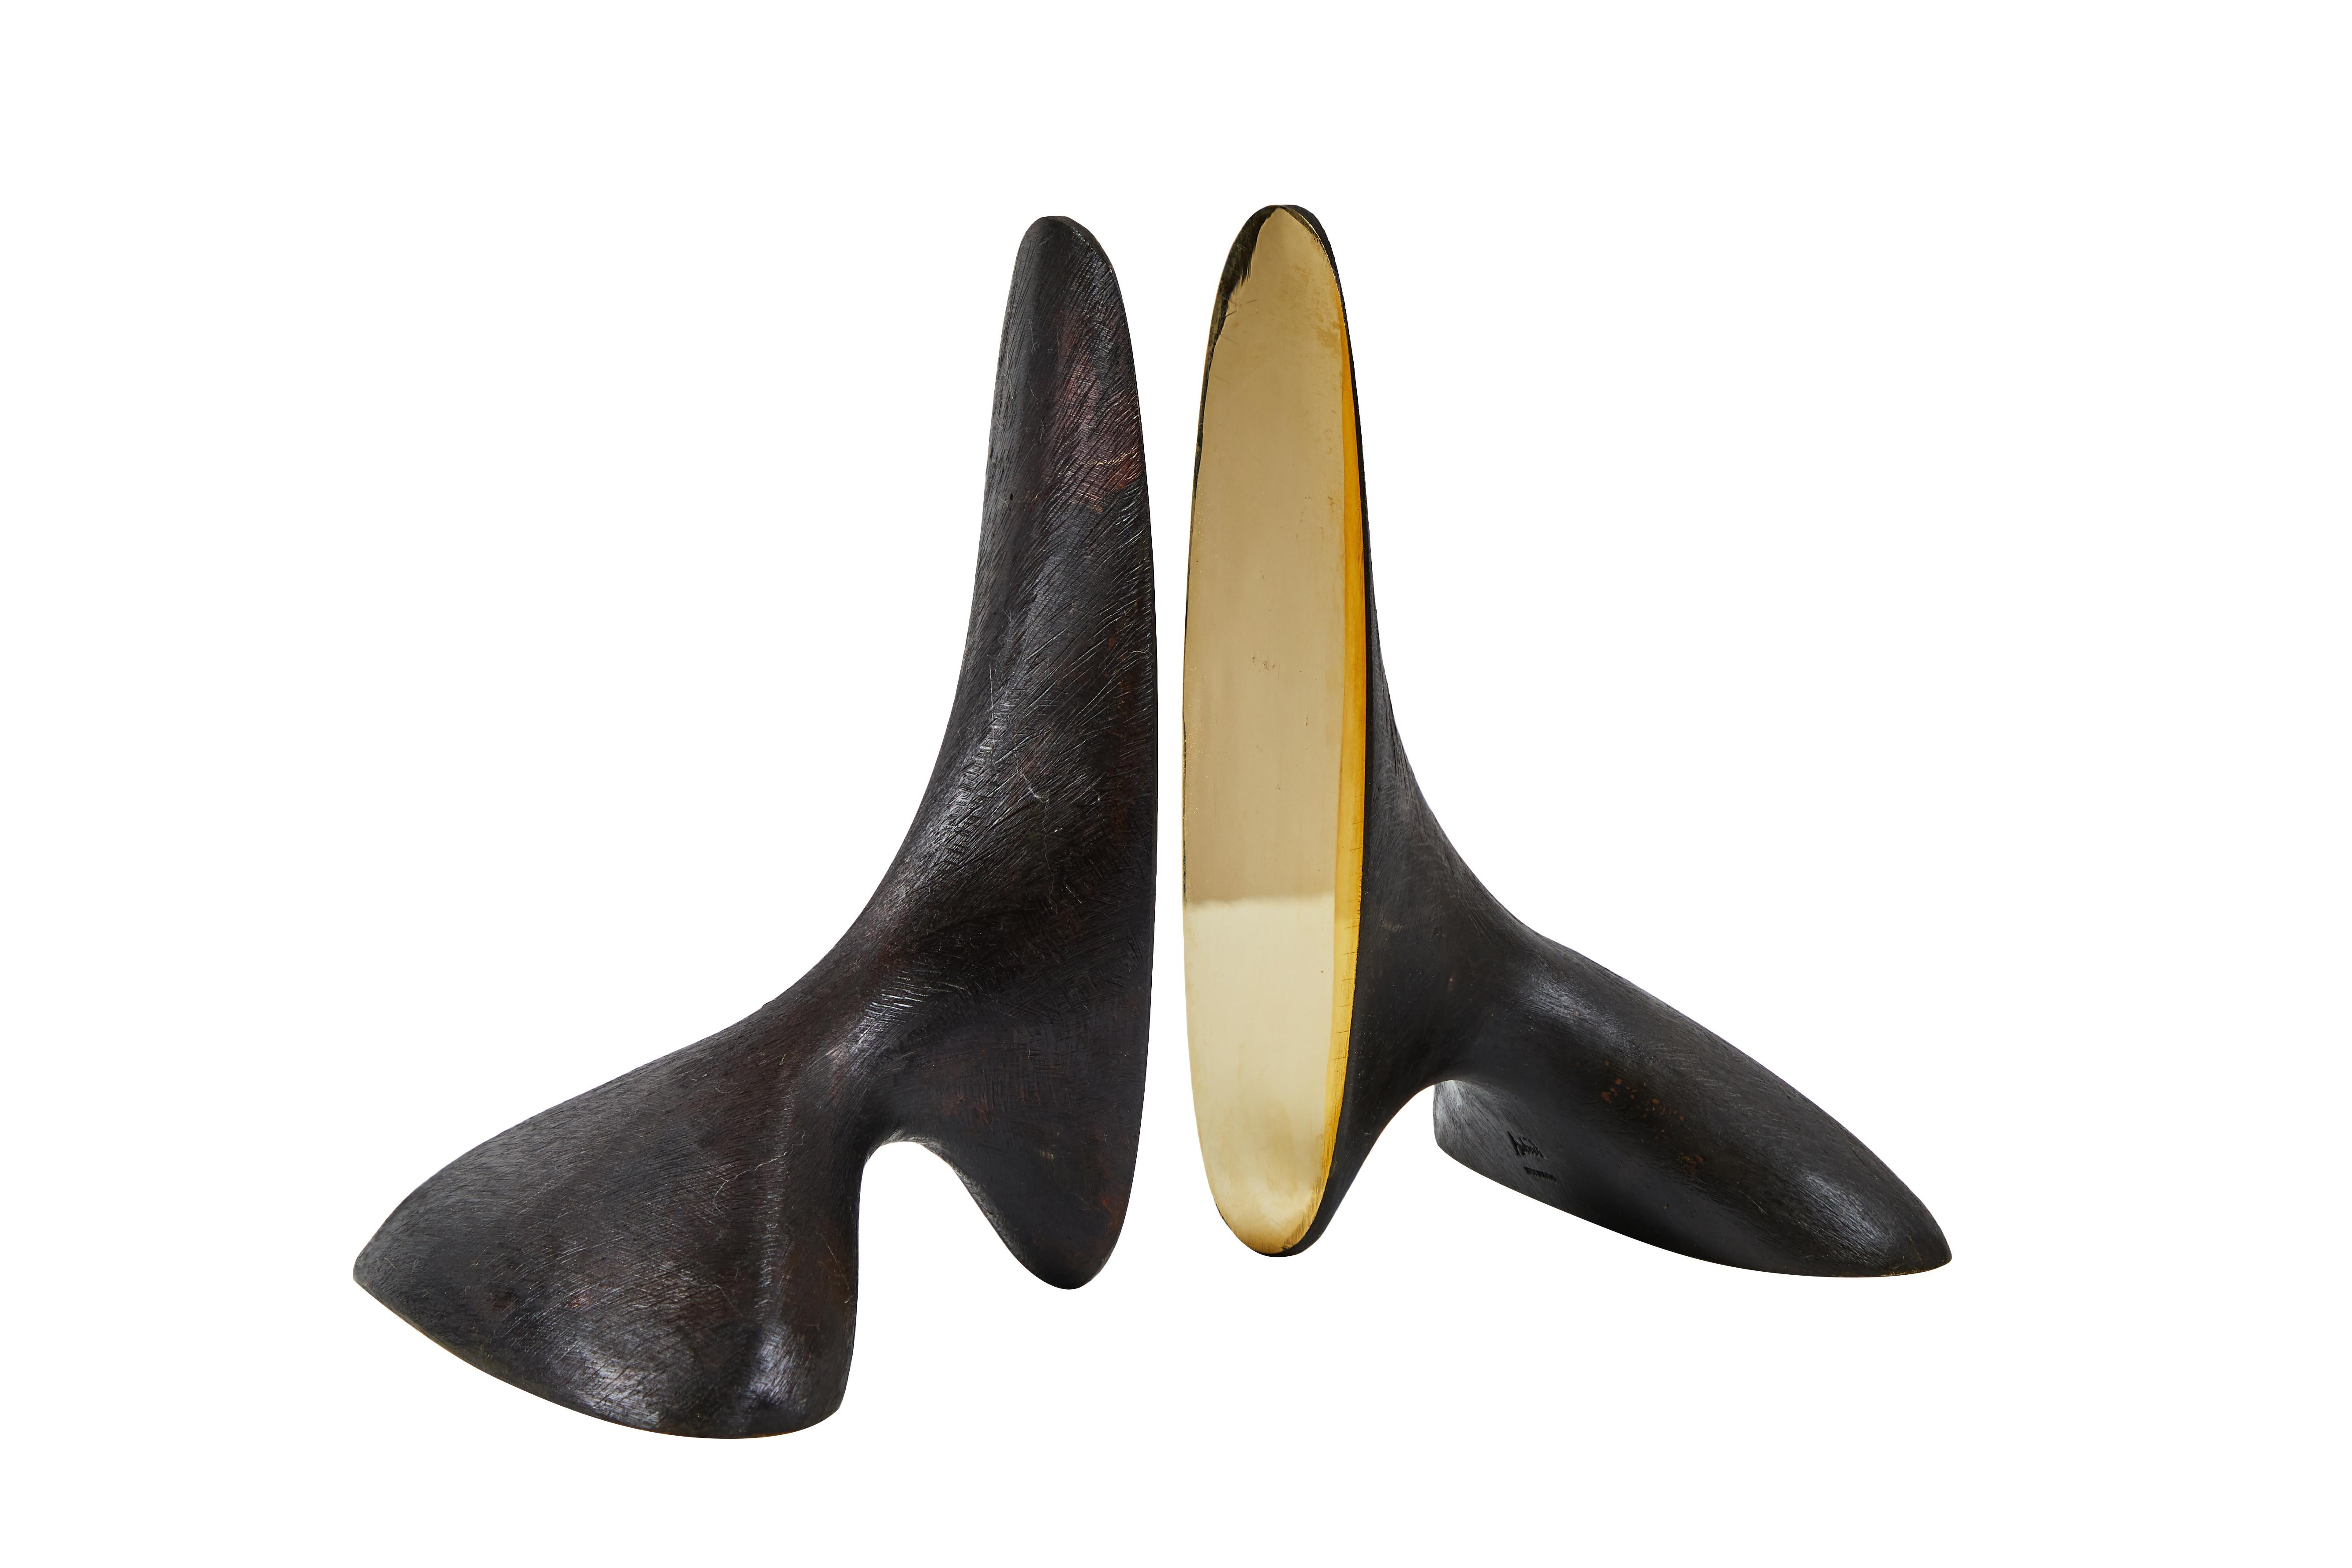 Carl Auböck model #3653 brass bookends. Designed in the 1950s, this incredibly refined and sculptural pair of bookends are executed in patinated and polished brass. 

Price is per pair. 2 pairs in stock. Out of stock lead time 2-3 weeks or more.